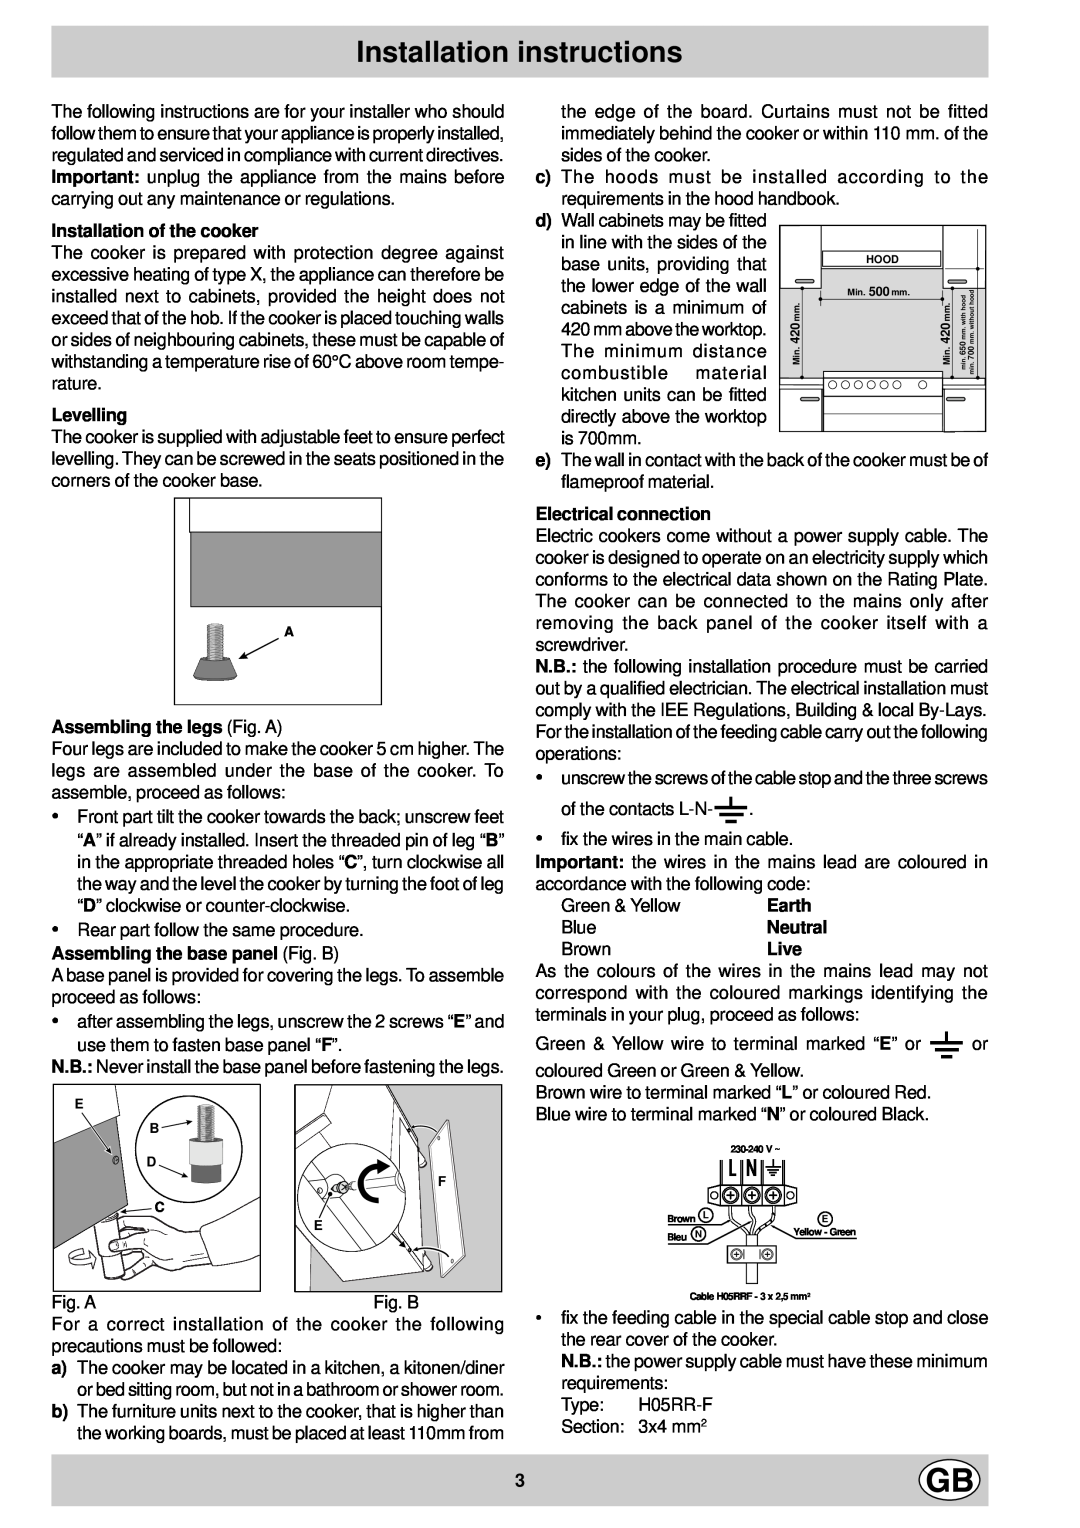 Indesit KG 3044 BE/G Installation instructions, Installation of the cooker, Levelling, Assembling the legs Fig. A, Earth 